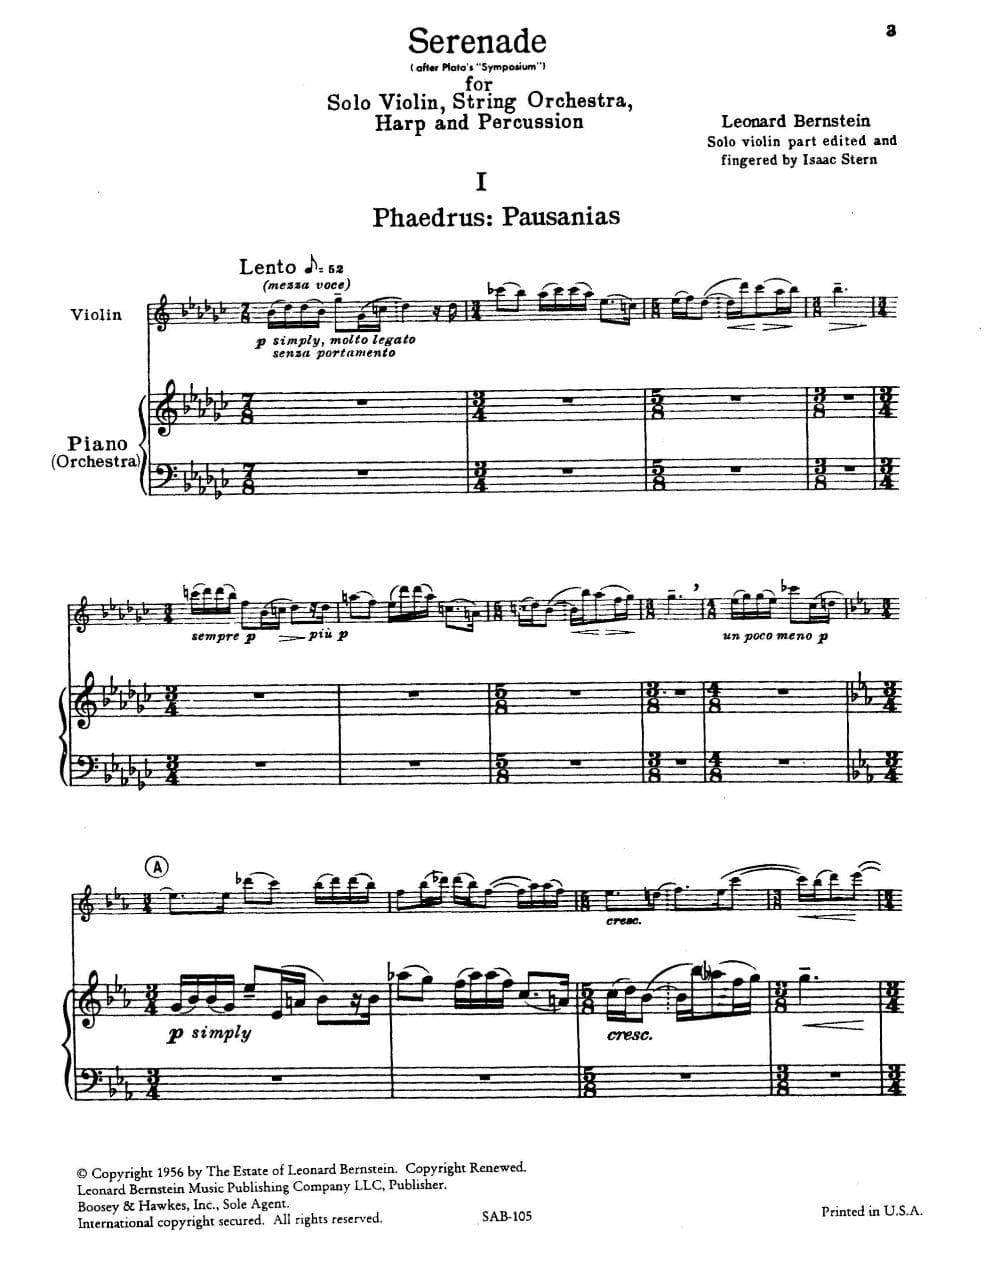 Bernstein, Leonard - Serenade (after Plato's "Symposium") for Violin and Piano - Edited by Stern - Boosey & Hawkes Edition